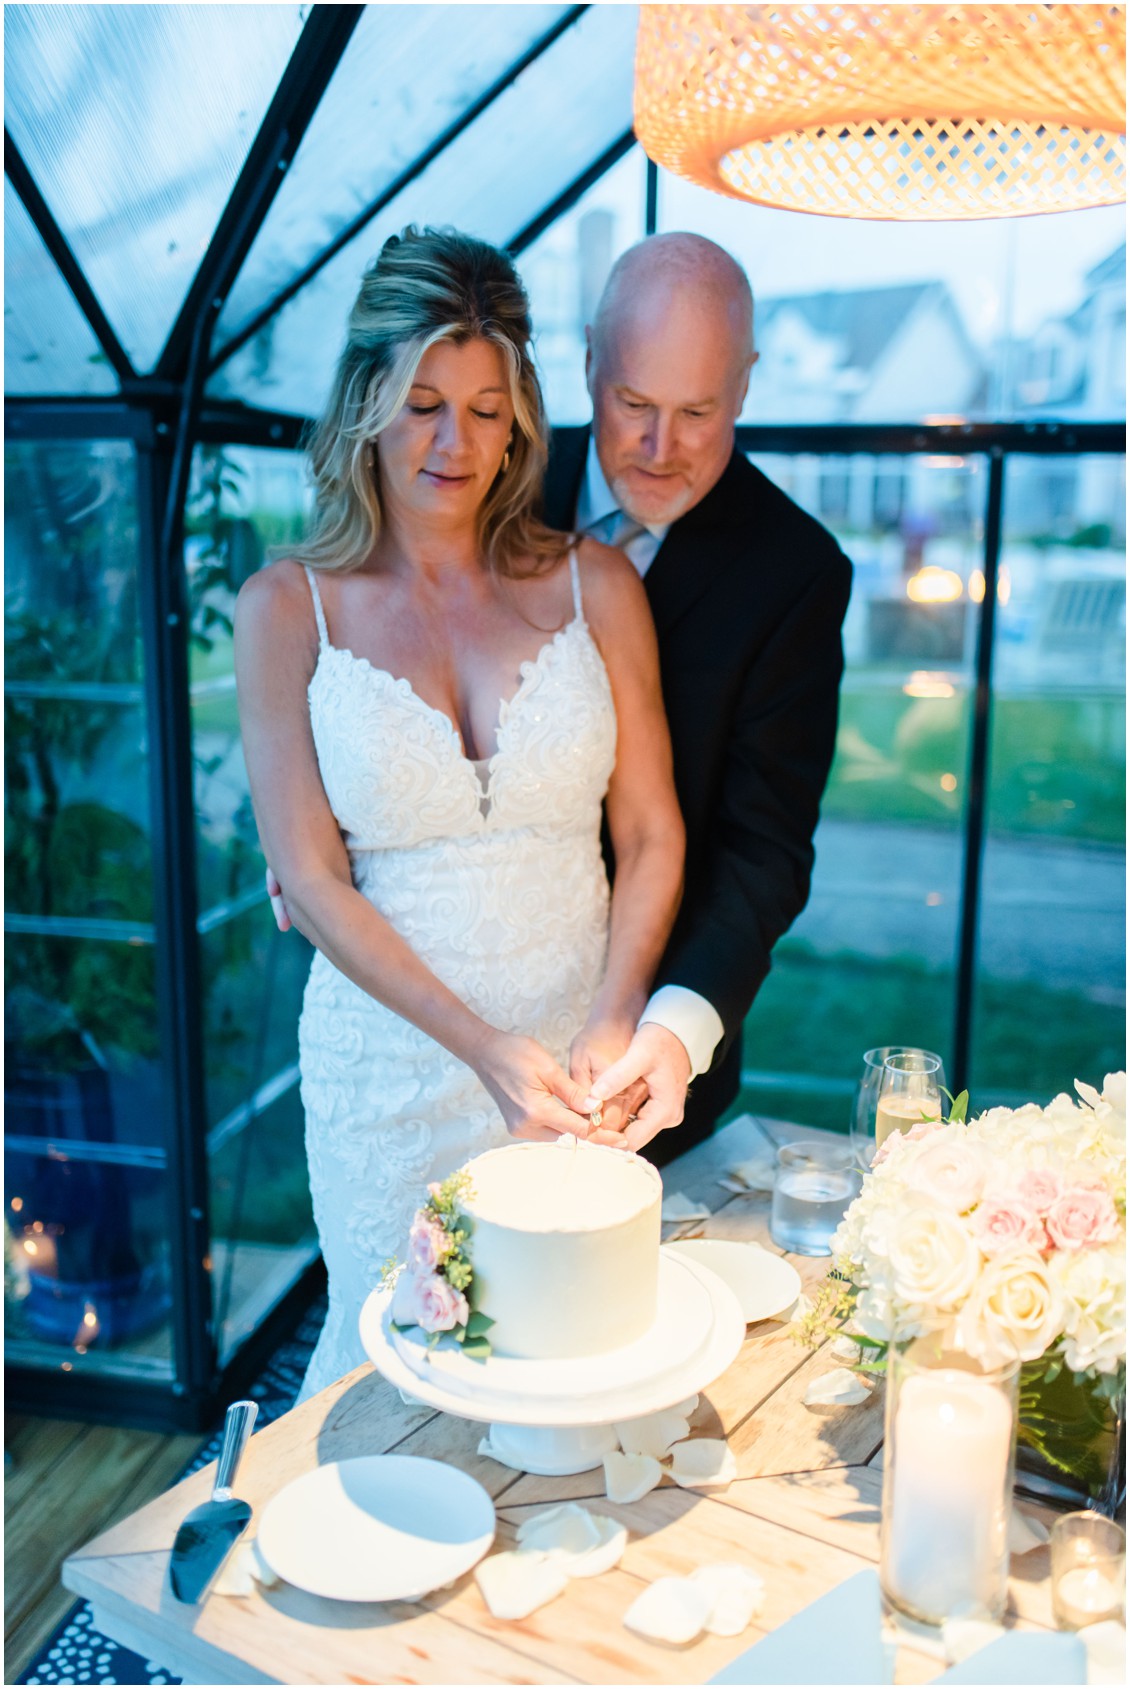 Bride and groom cutting cake romantic elopement| My Eastern Shore Wedding | Alexandra Kent Photography | Chesapeake Blooms | Steven Anthony Cakes